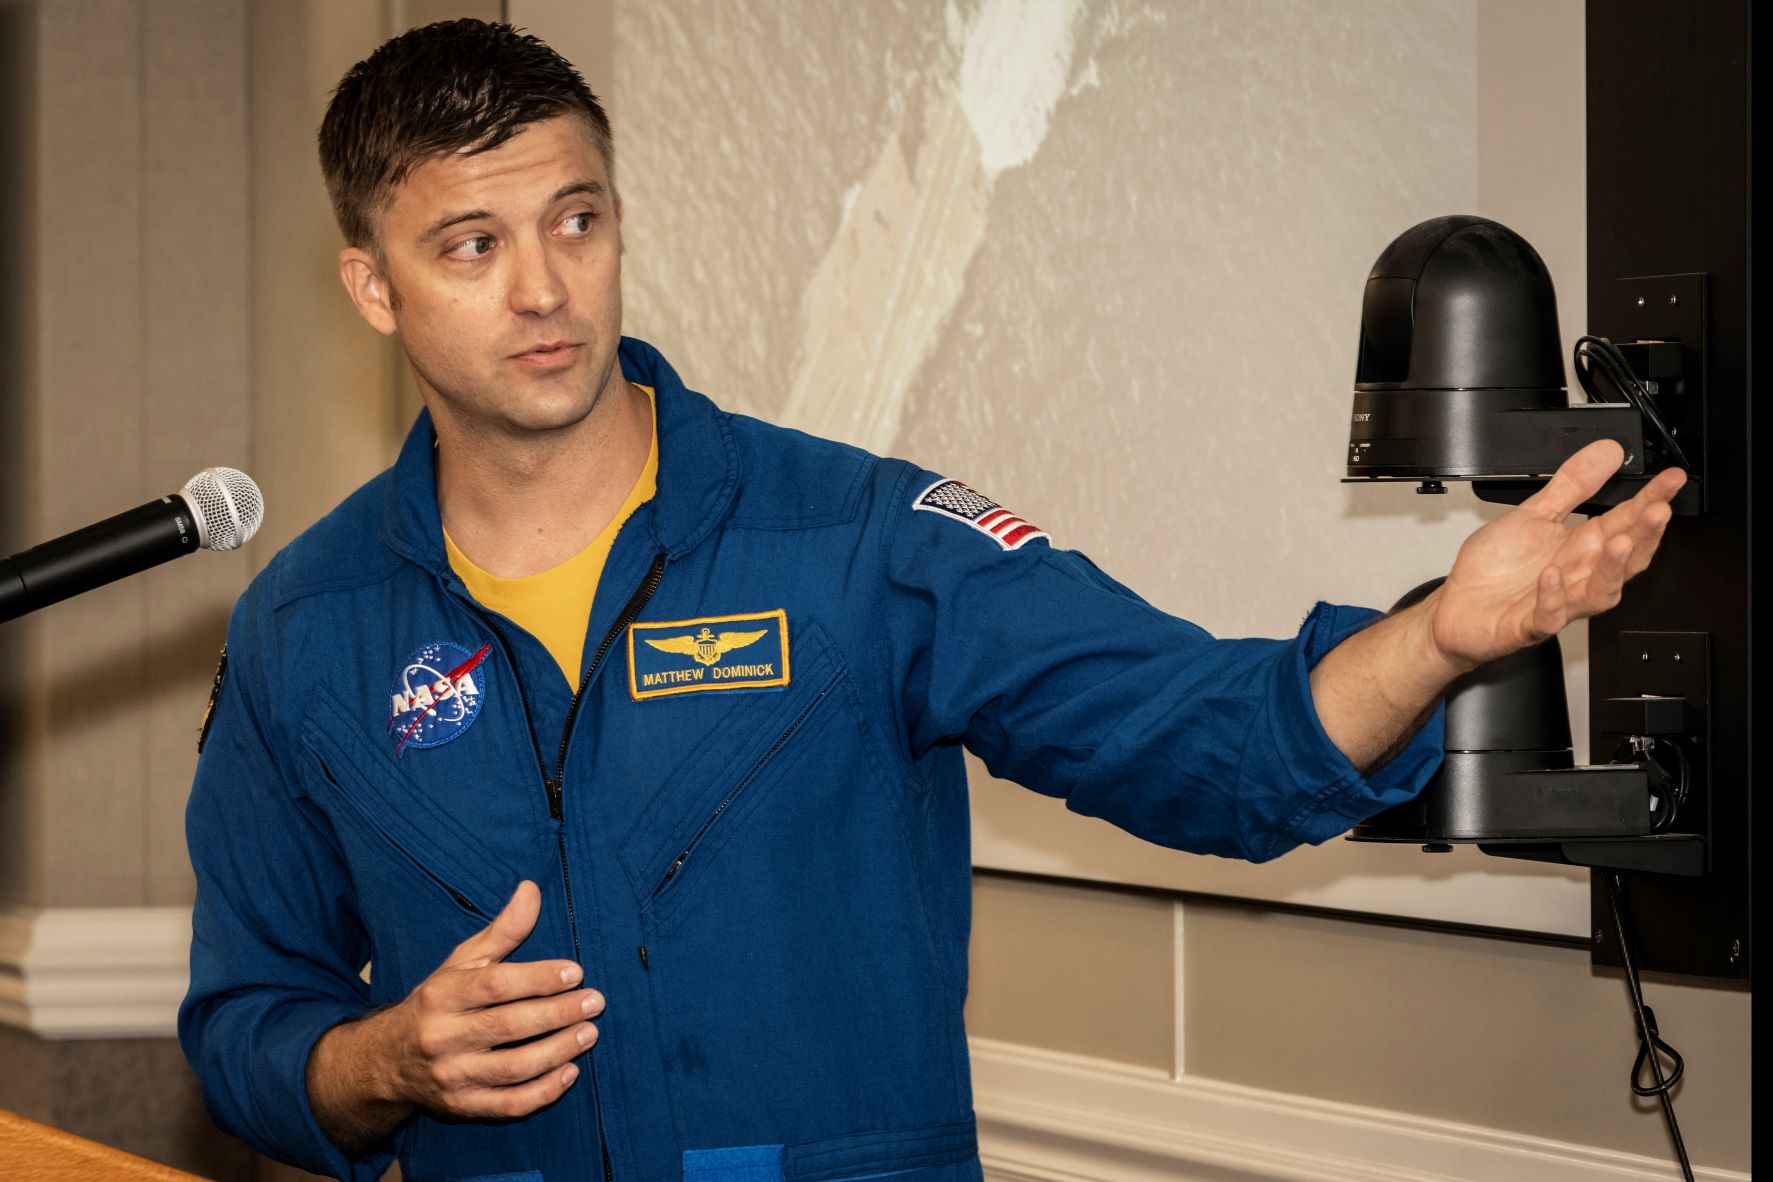 NASA astronaut Matthew Dominick shares stories from his days flying fighter aircraft as a Navy pilot during his keynote address Sept. 20 as part of Marshall Space Flight Center’s annual Safety Day. 